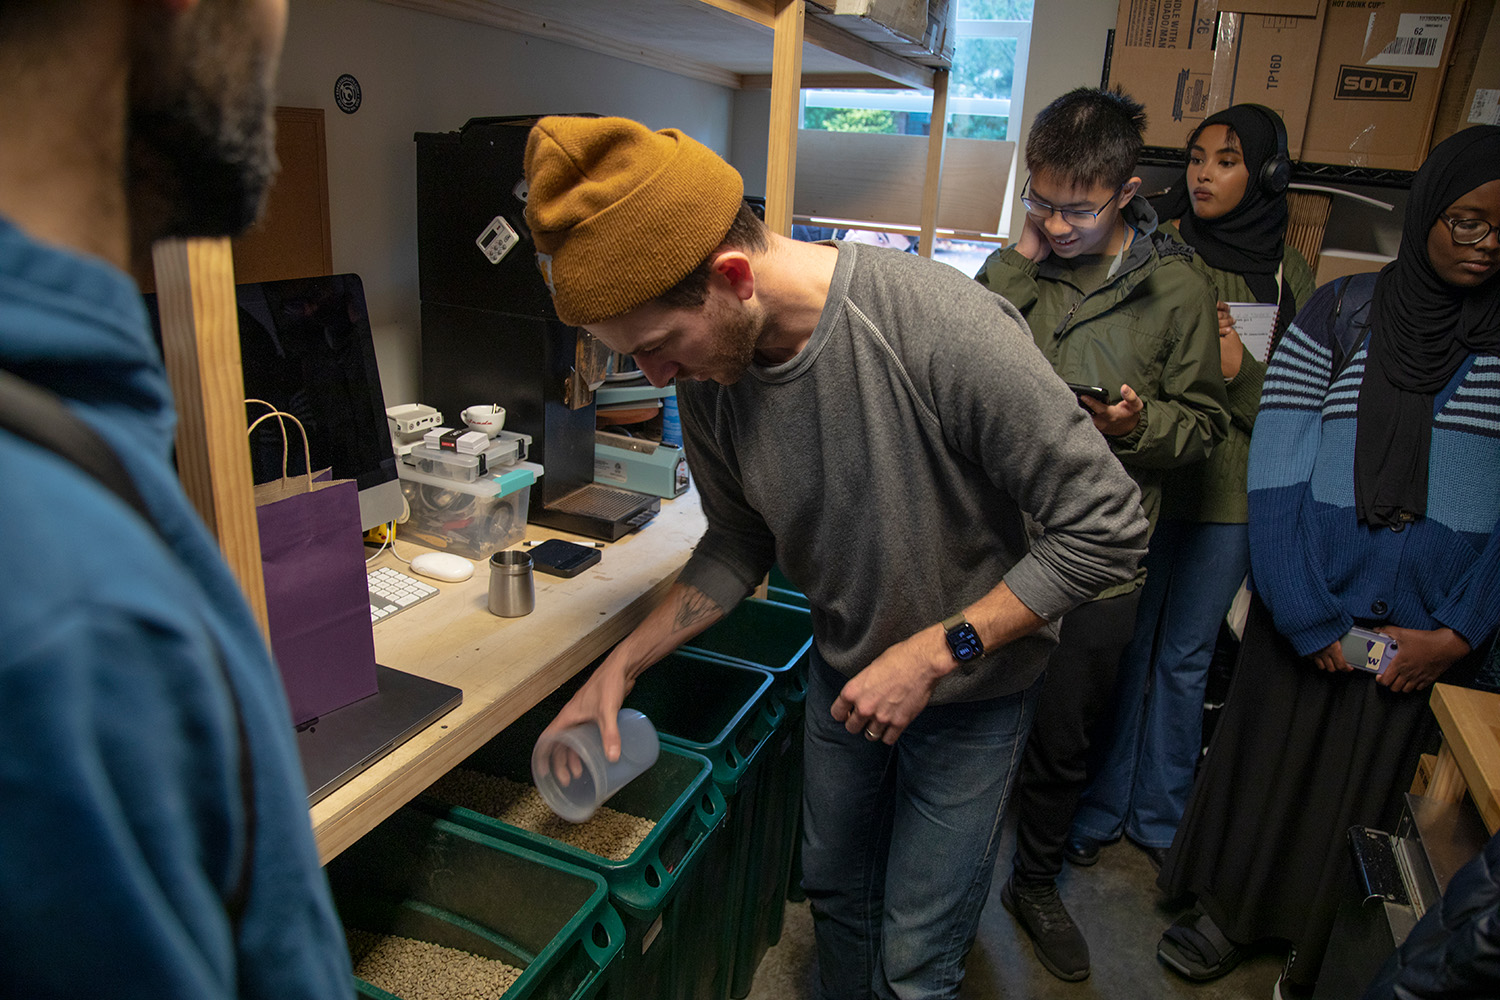 Lander Coffee owner Dustin Johnson uses a plastic cup to scoop out some unroasted green coffee beans from a bin. Johnson is wearing an orange beenie,a gray sweater and blue jeans. There are three students behind him and one to the front and right of where he is standing. There is coffee equipment and boxes off to the side.